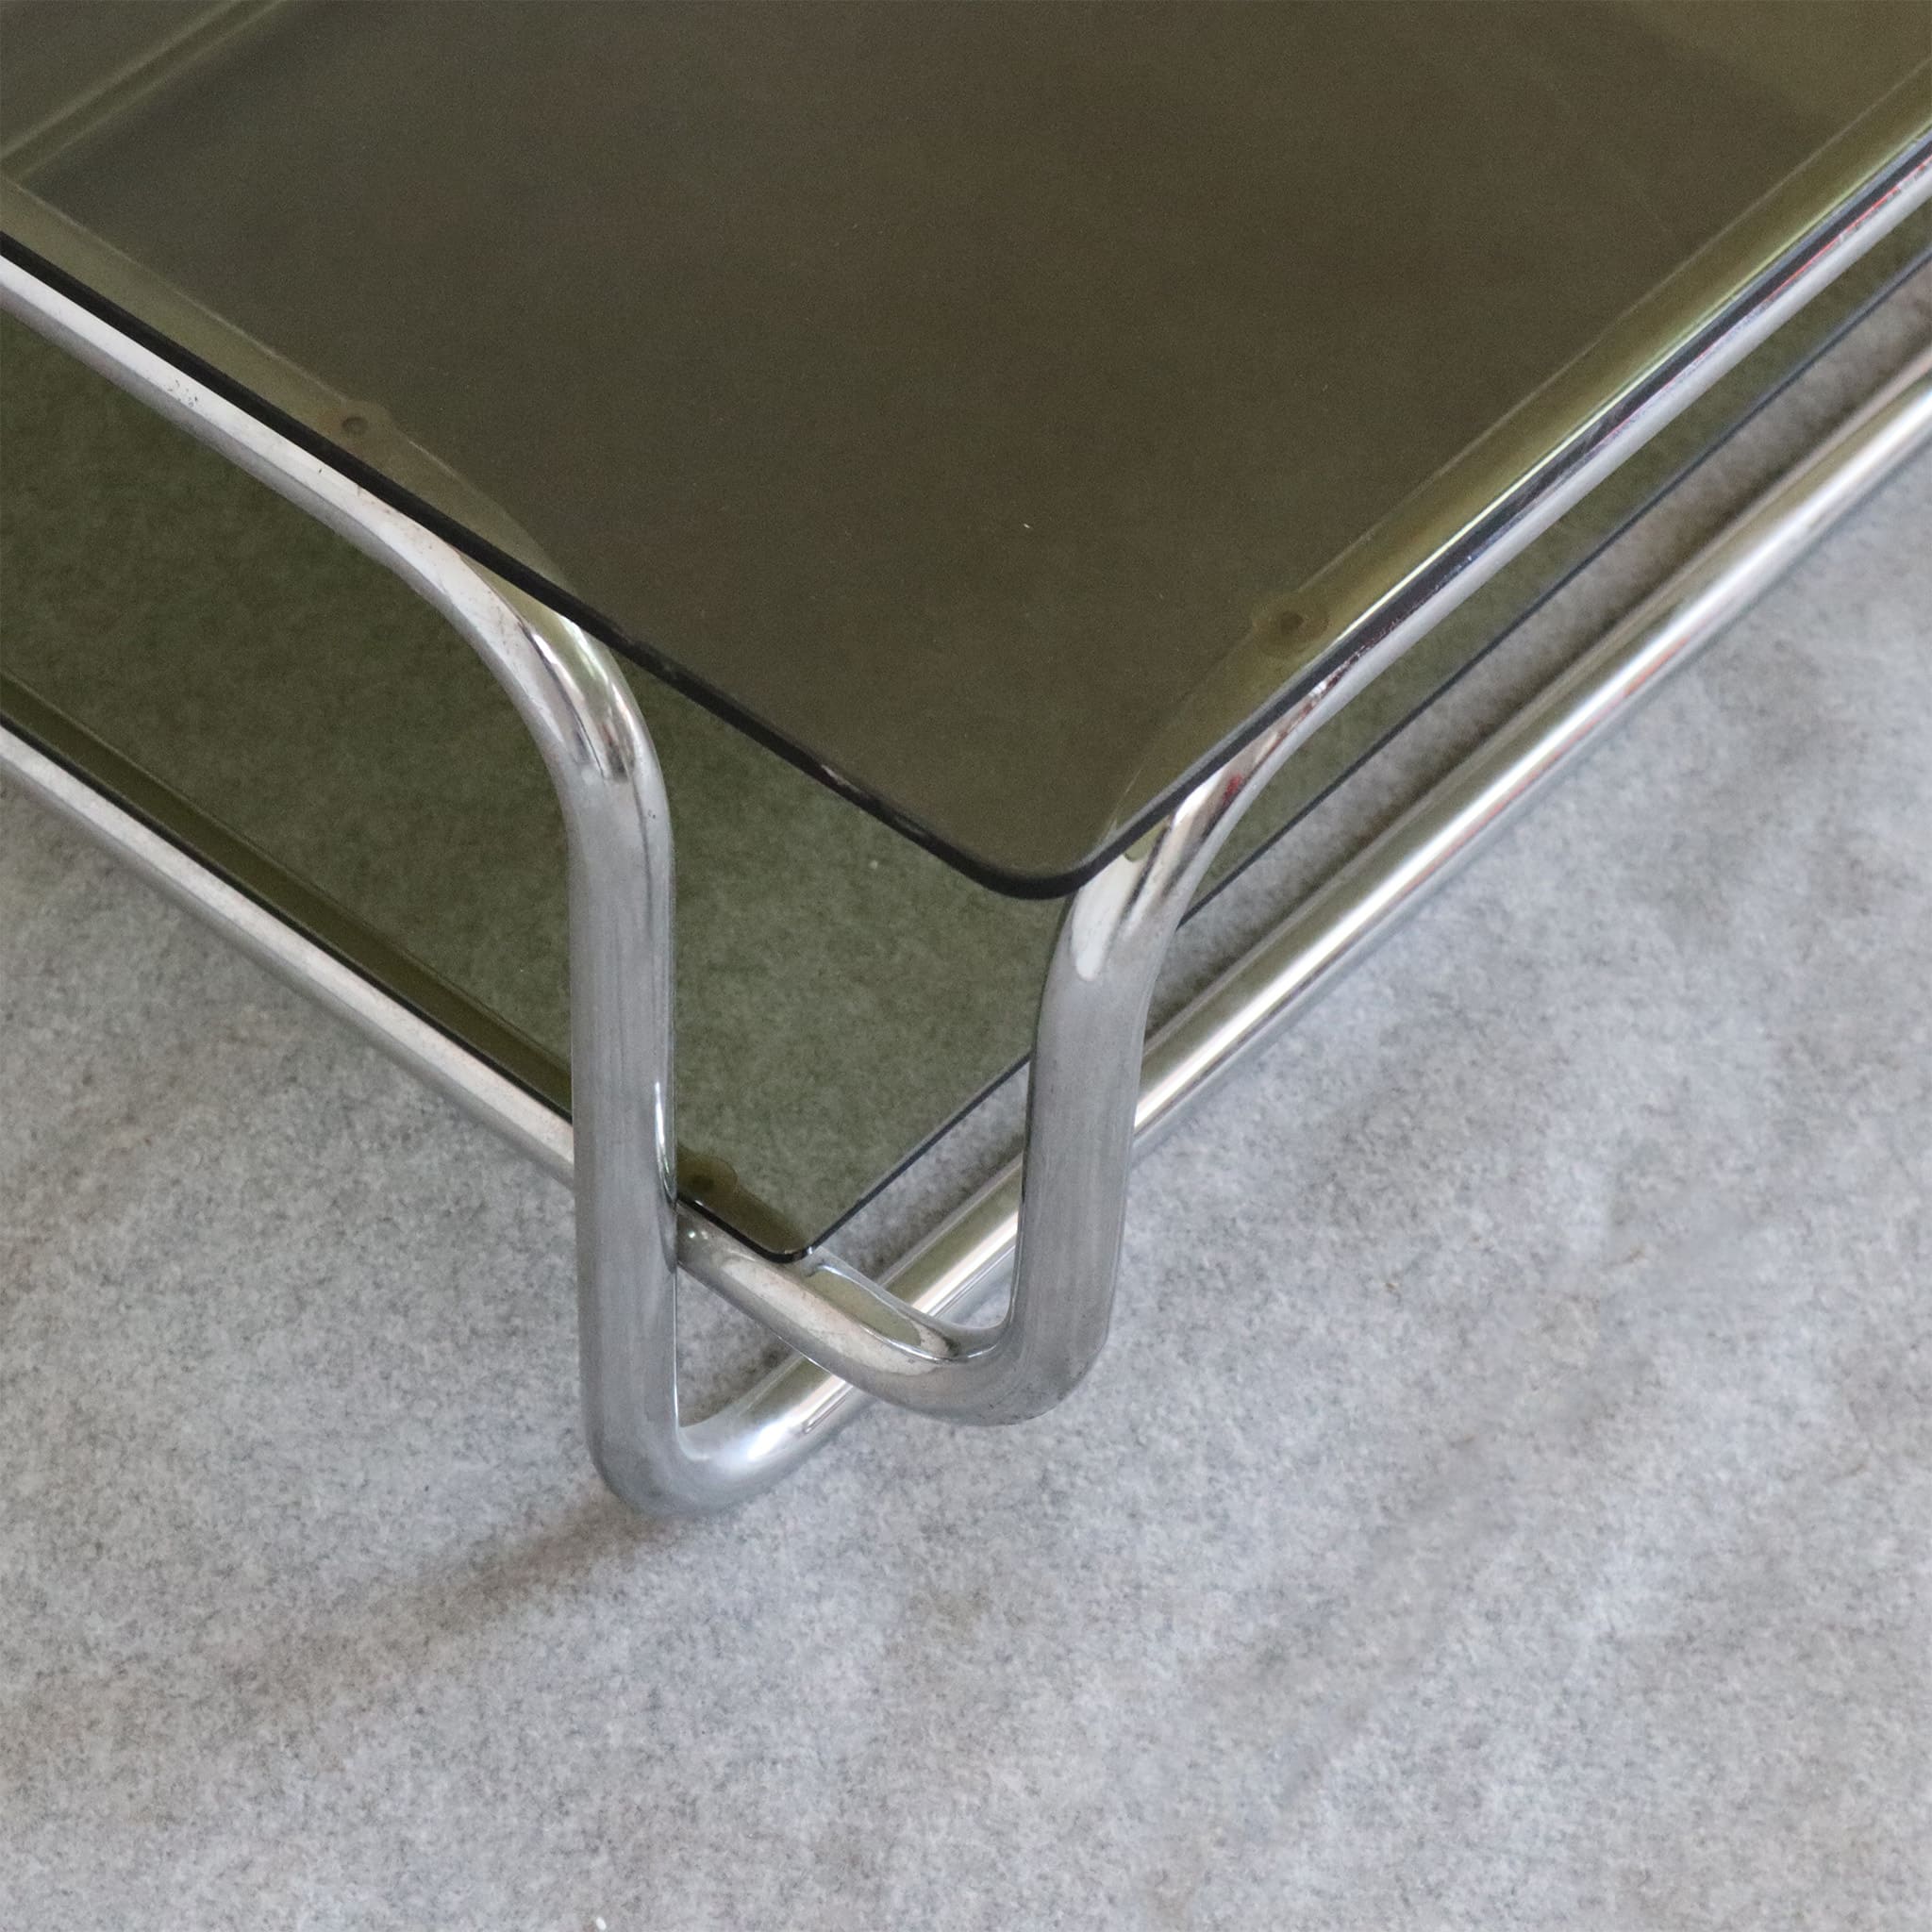 visionidepoca-modern-art-coffee-table-1970s-tubular-chromed-and-double-smoked-glass-made-in-italy-detail-view